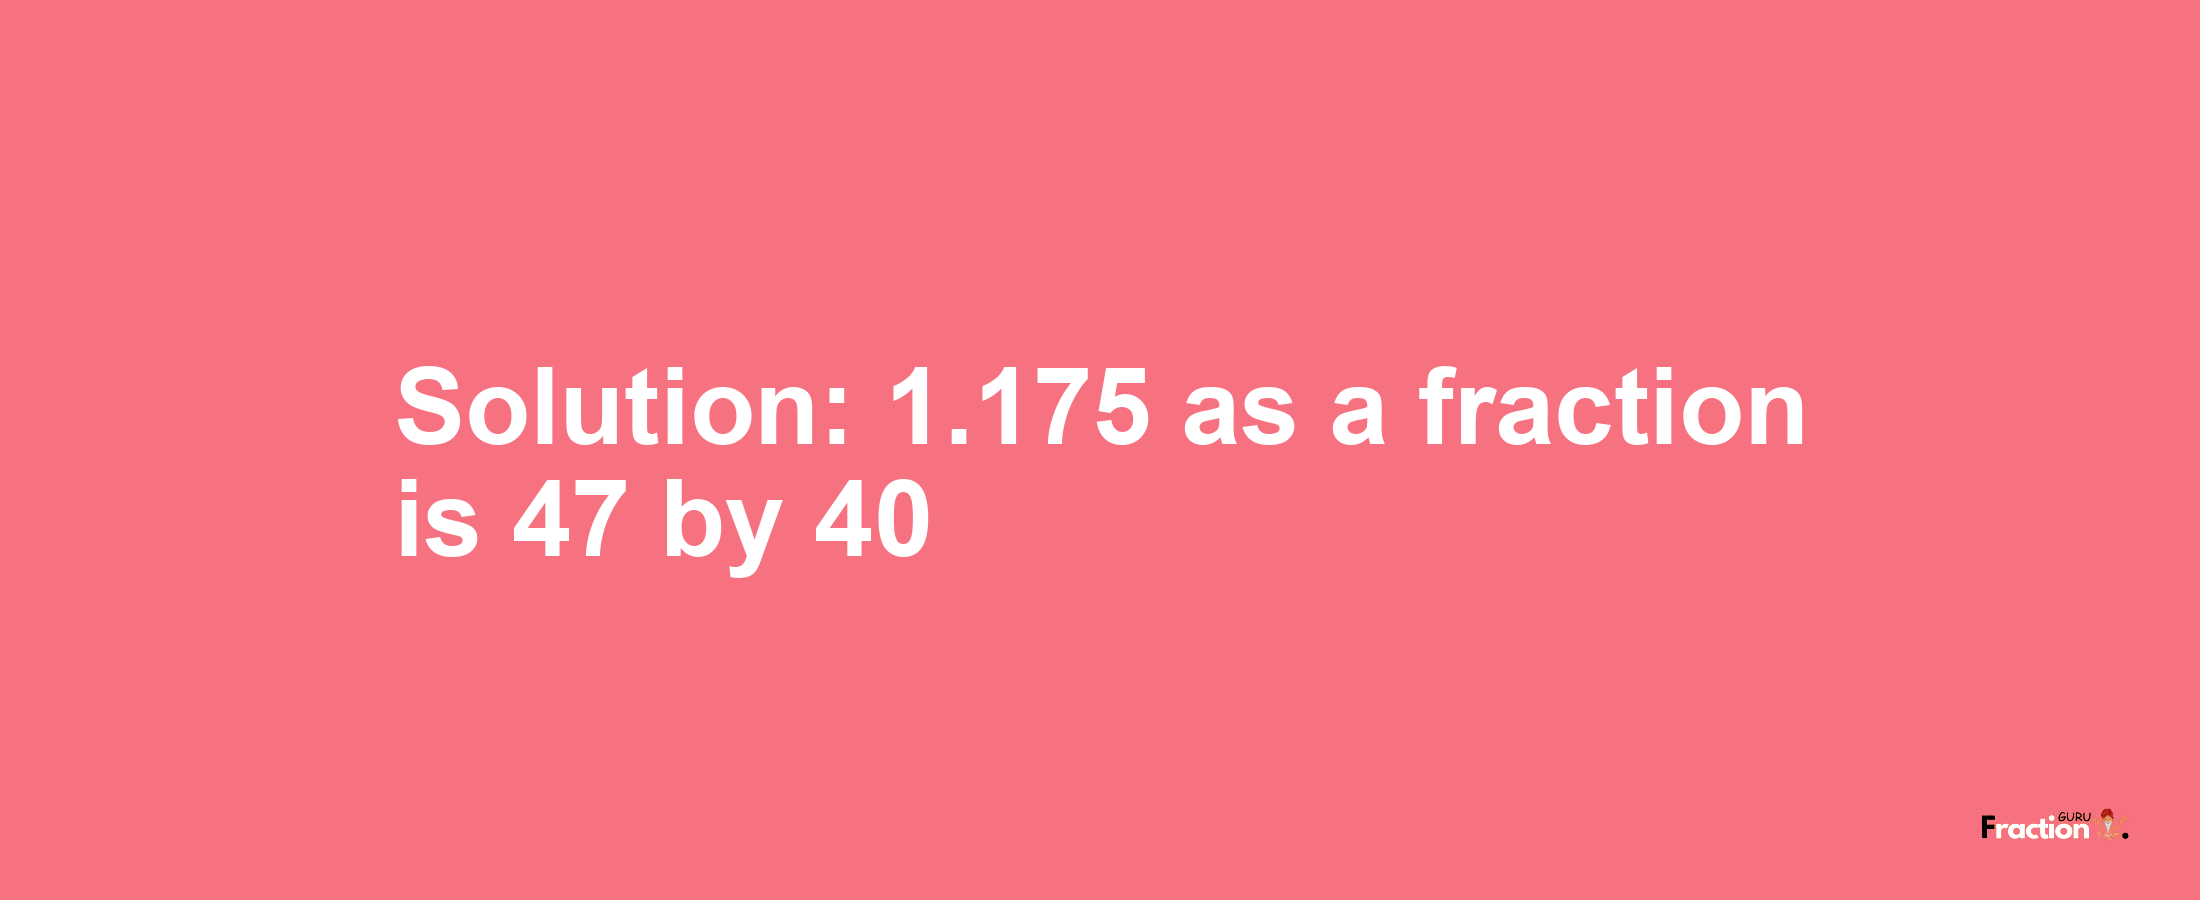 Solution:1.175 as a fraction is 47/40